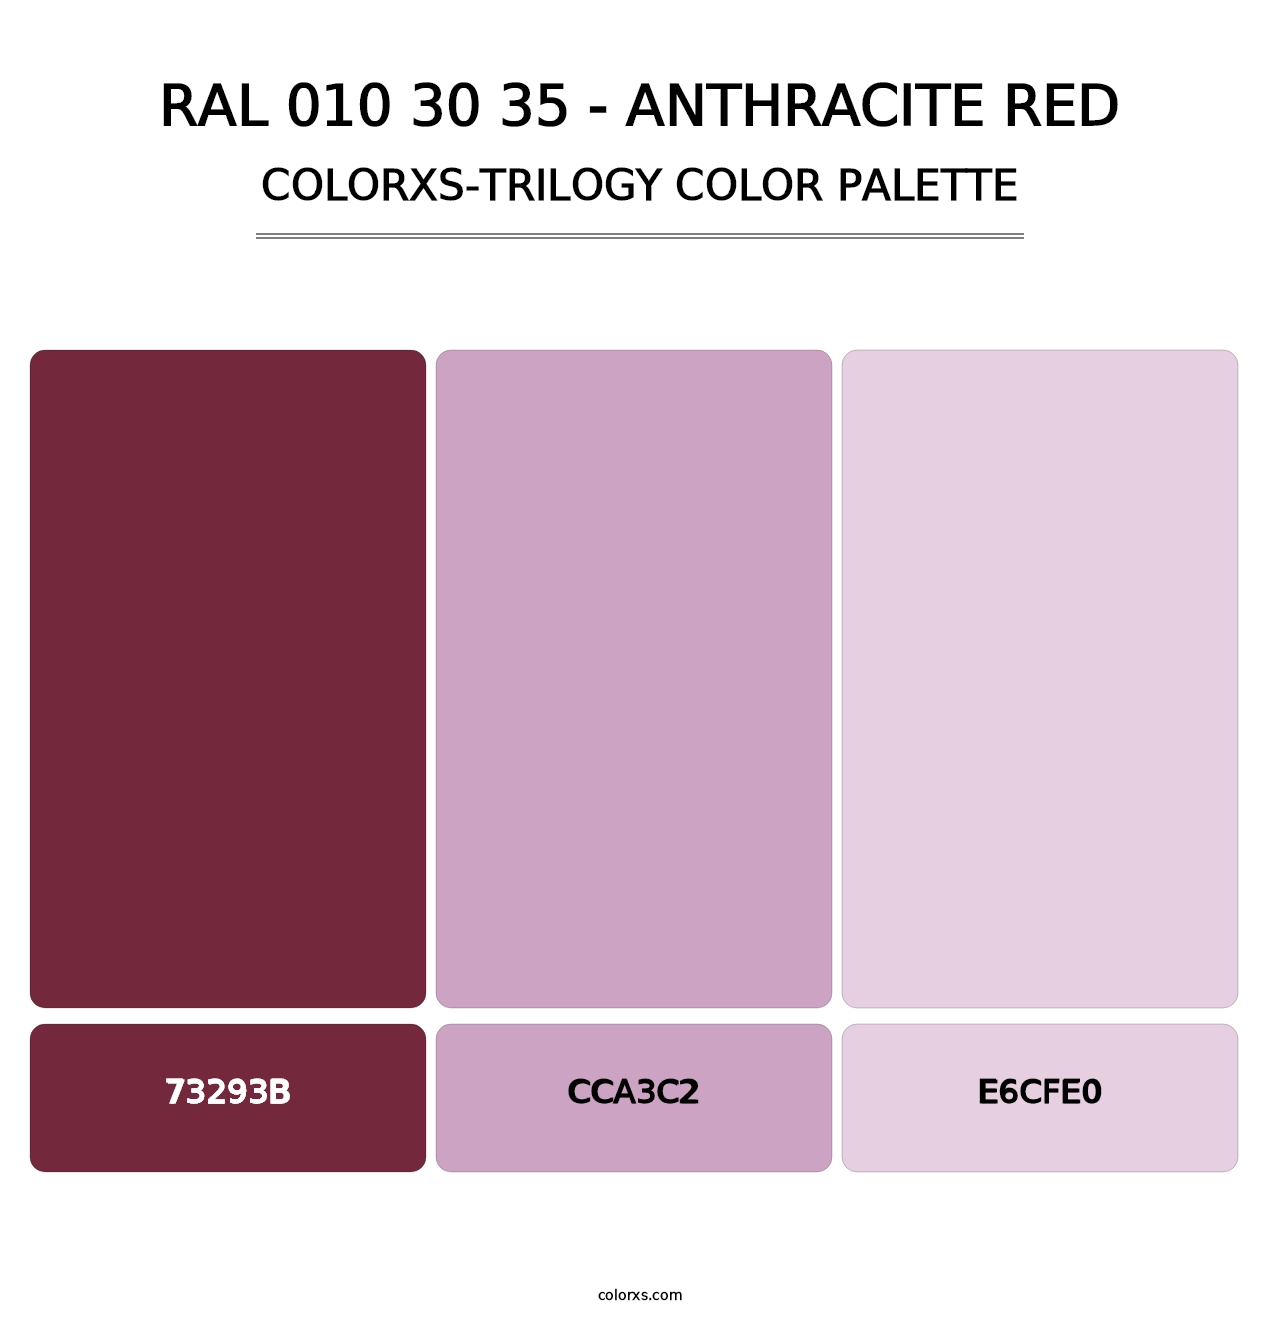 RAL 010 30 35 - Anthracite Red - Colorxs Trilogy Palette